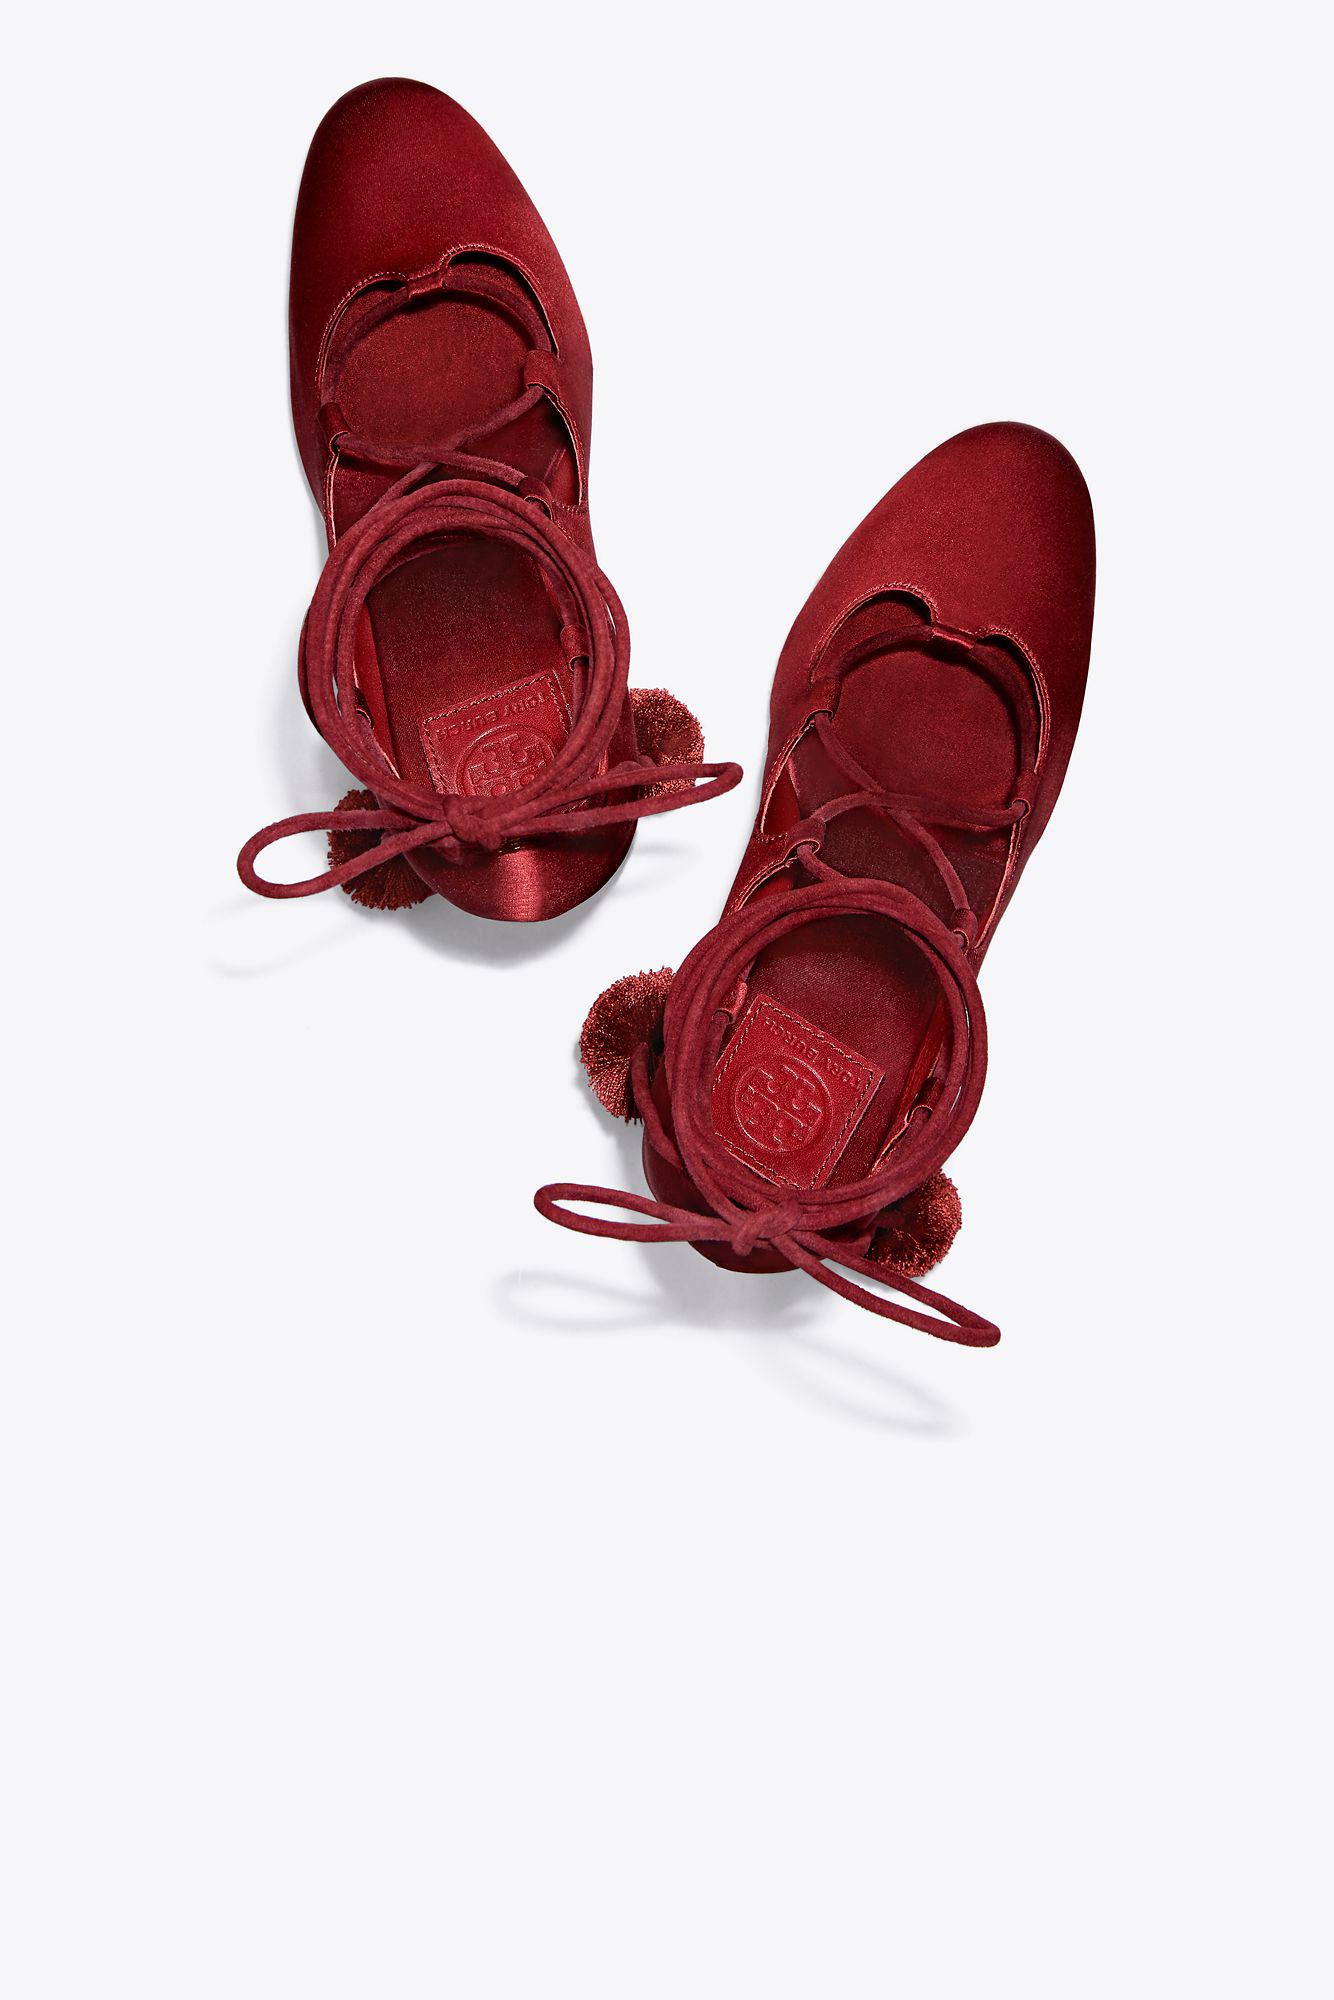 Tory Burch Pompom-embellished Lace-up Satin Wedge Espadrilles Merlot in Red  | Lyst